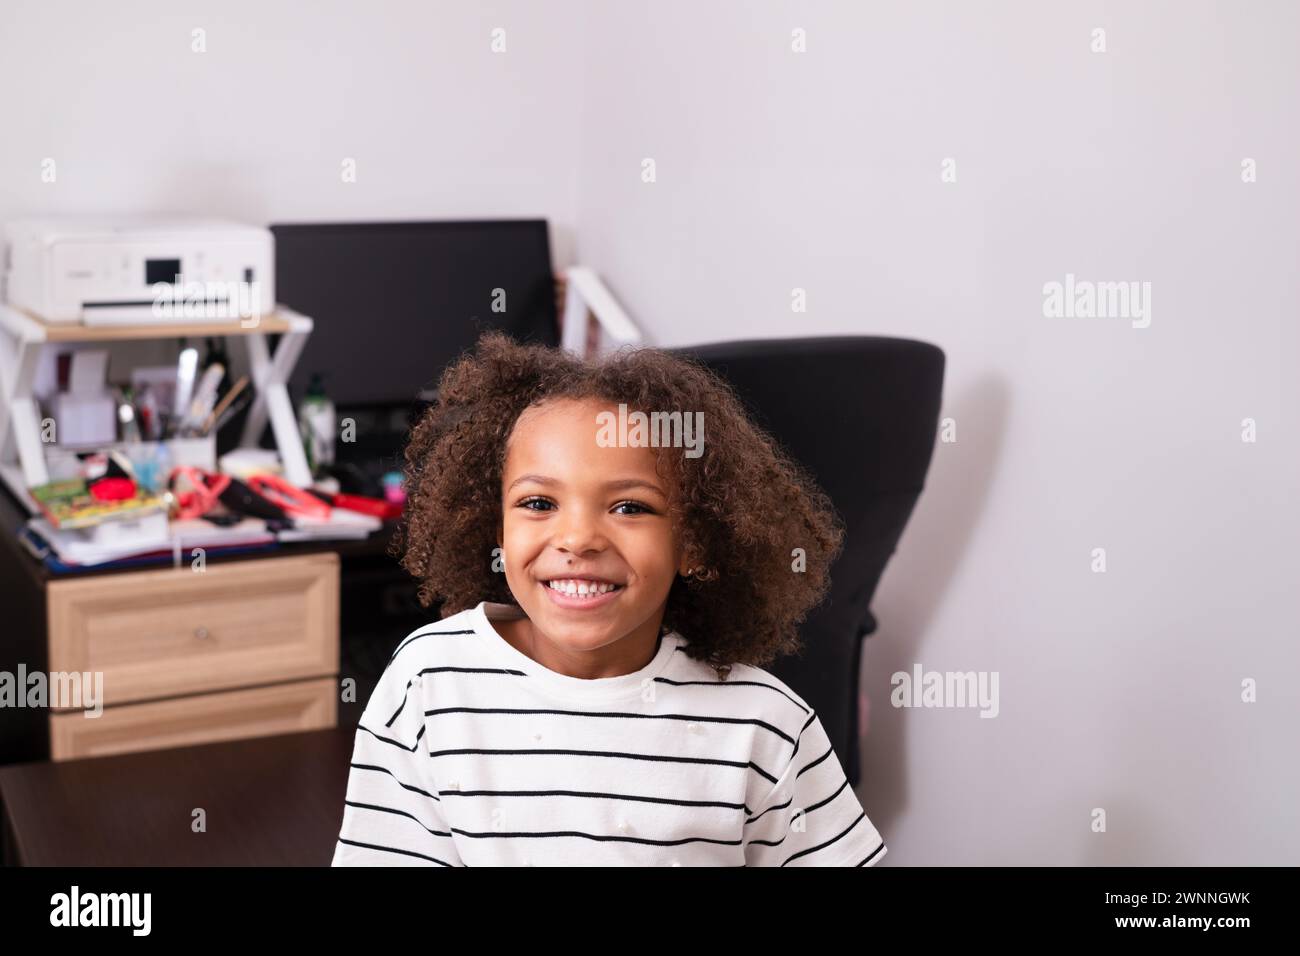 A cute and adorable black young girl with curly hair is smiling on a work or study desk on the background. Themes of home schooled kids, learning and Stock Photo